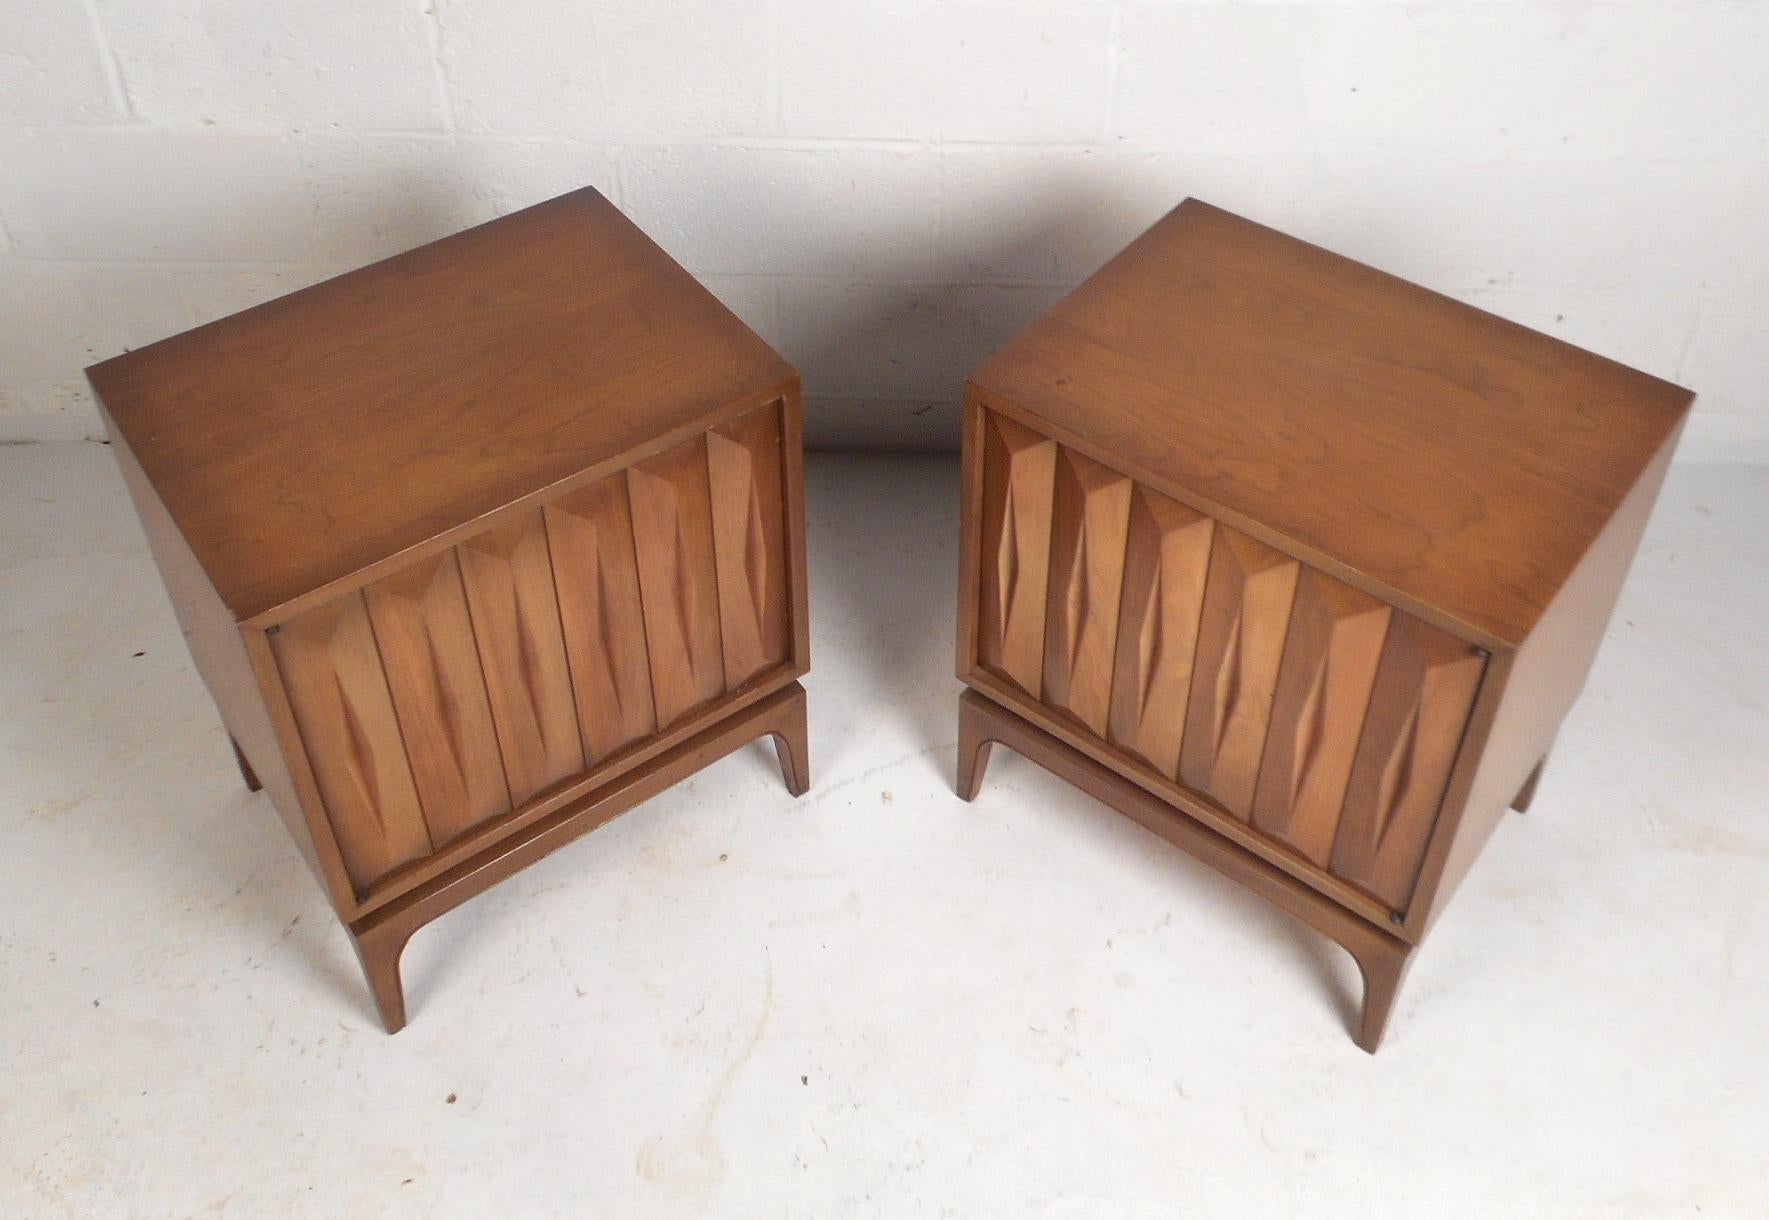 These beautiful Mid-Century Modern walnut end tables feature swinging cabinet doors with a three dimensional sculpted pattern on the front. This stylish pair offers plenty of room for storage within its large compartment with a shelf. The legs of